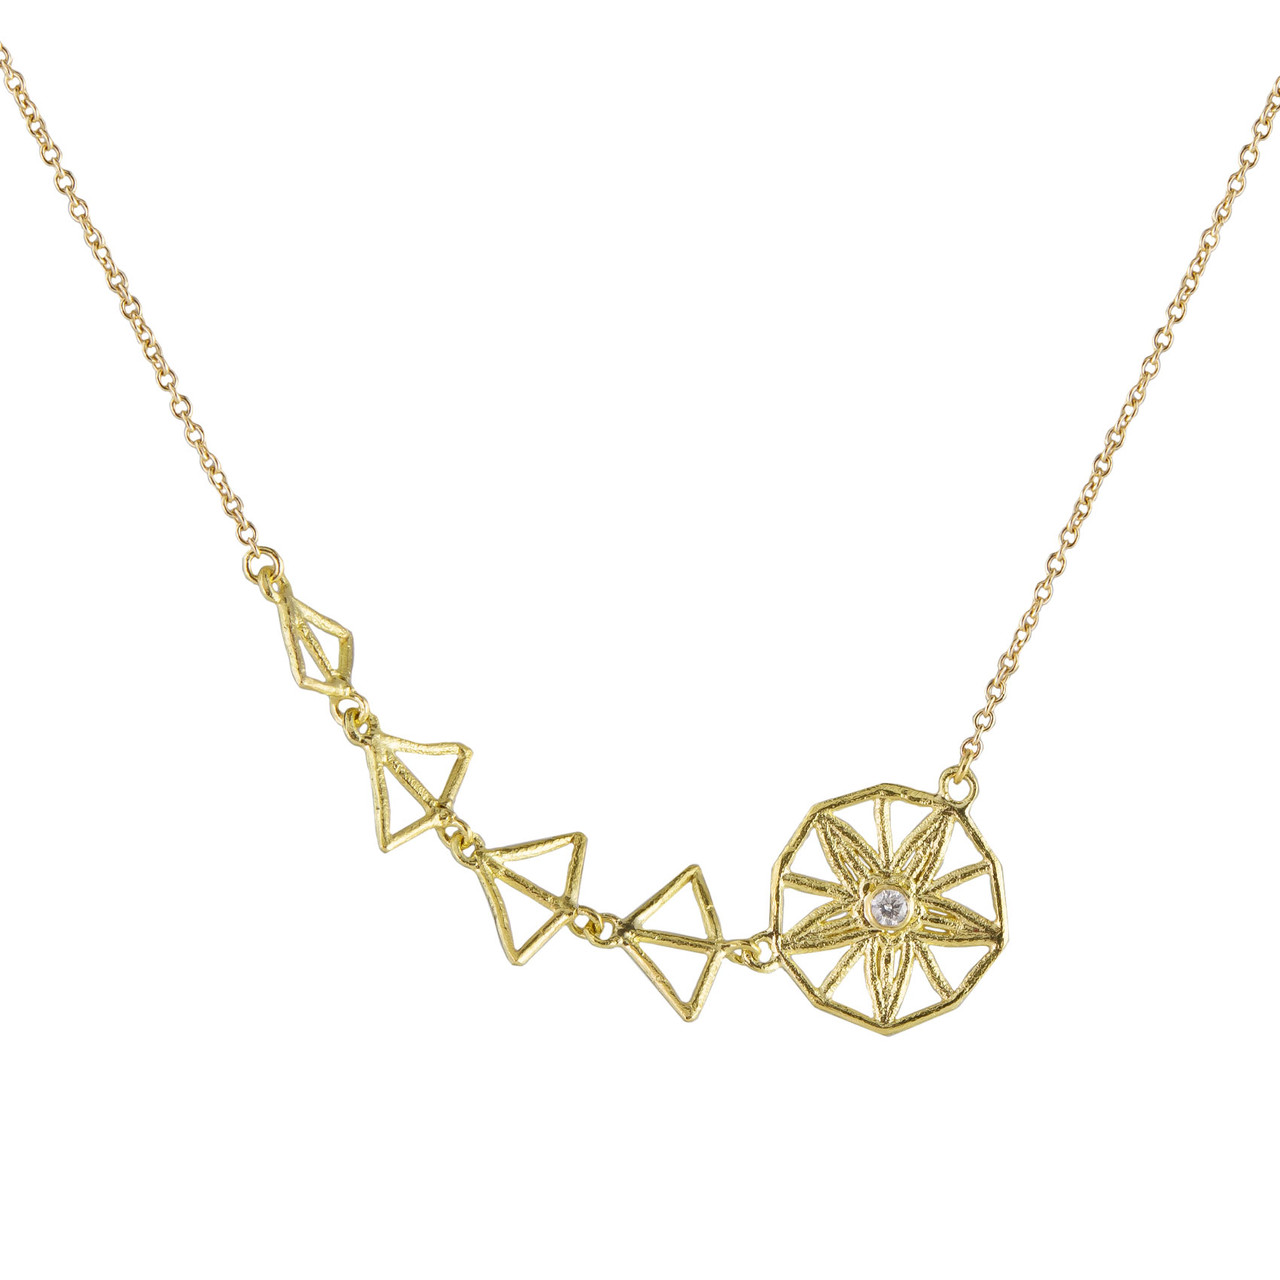 Shooting Star Necklace In 14 Kt Yellow Gold Vermeil On Sterling Silver |  LMJ | Wolf & Badger